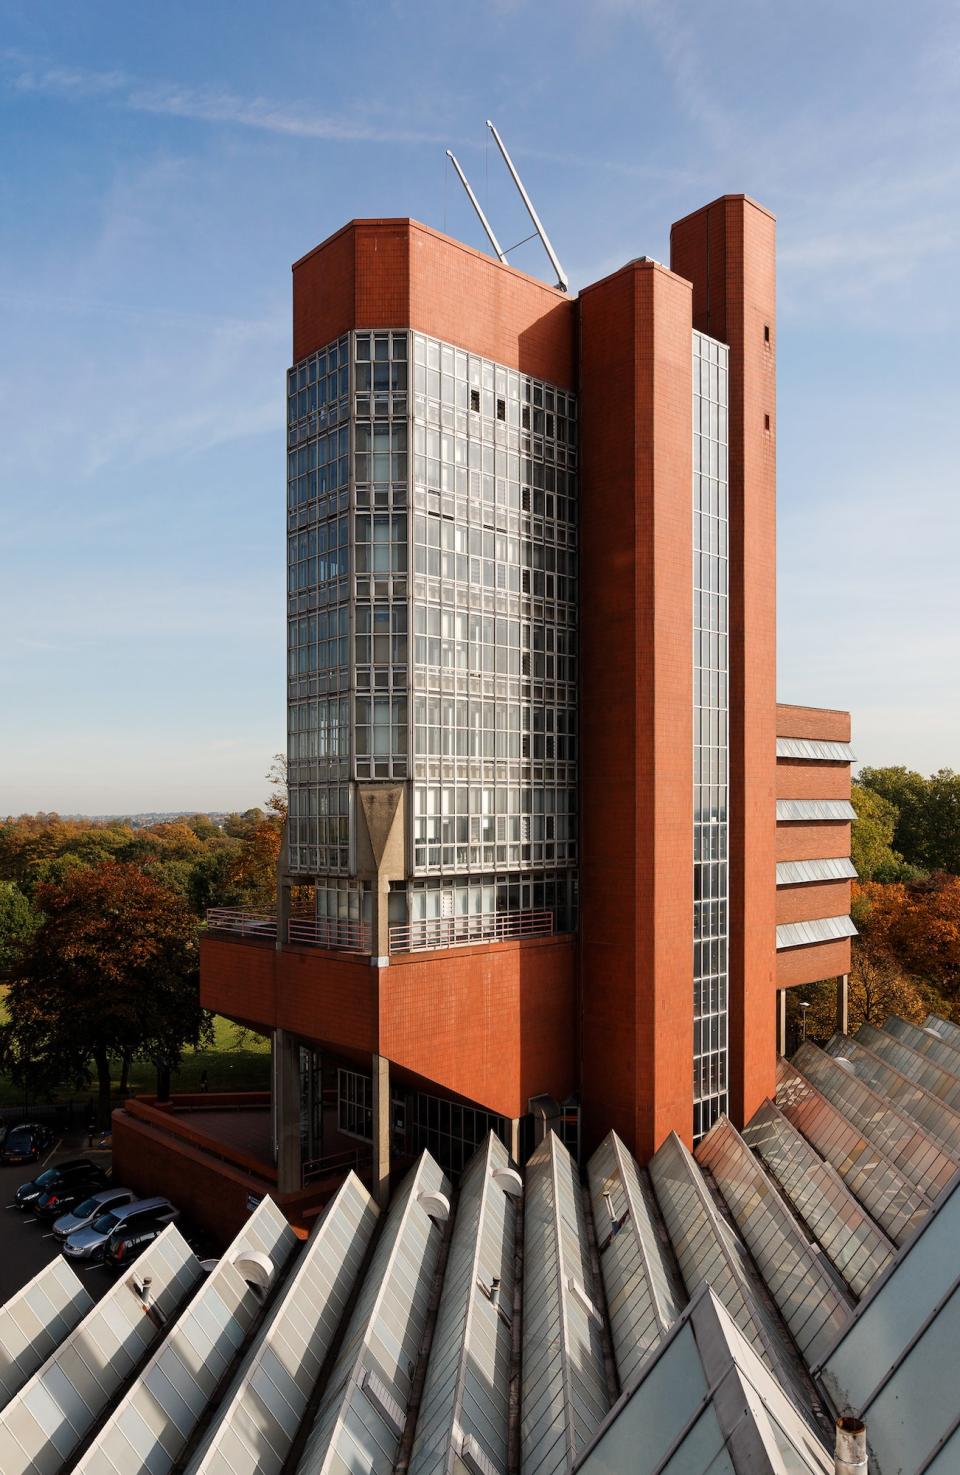 Engineering Building, University of Leicester